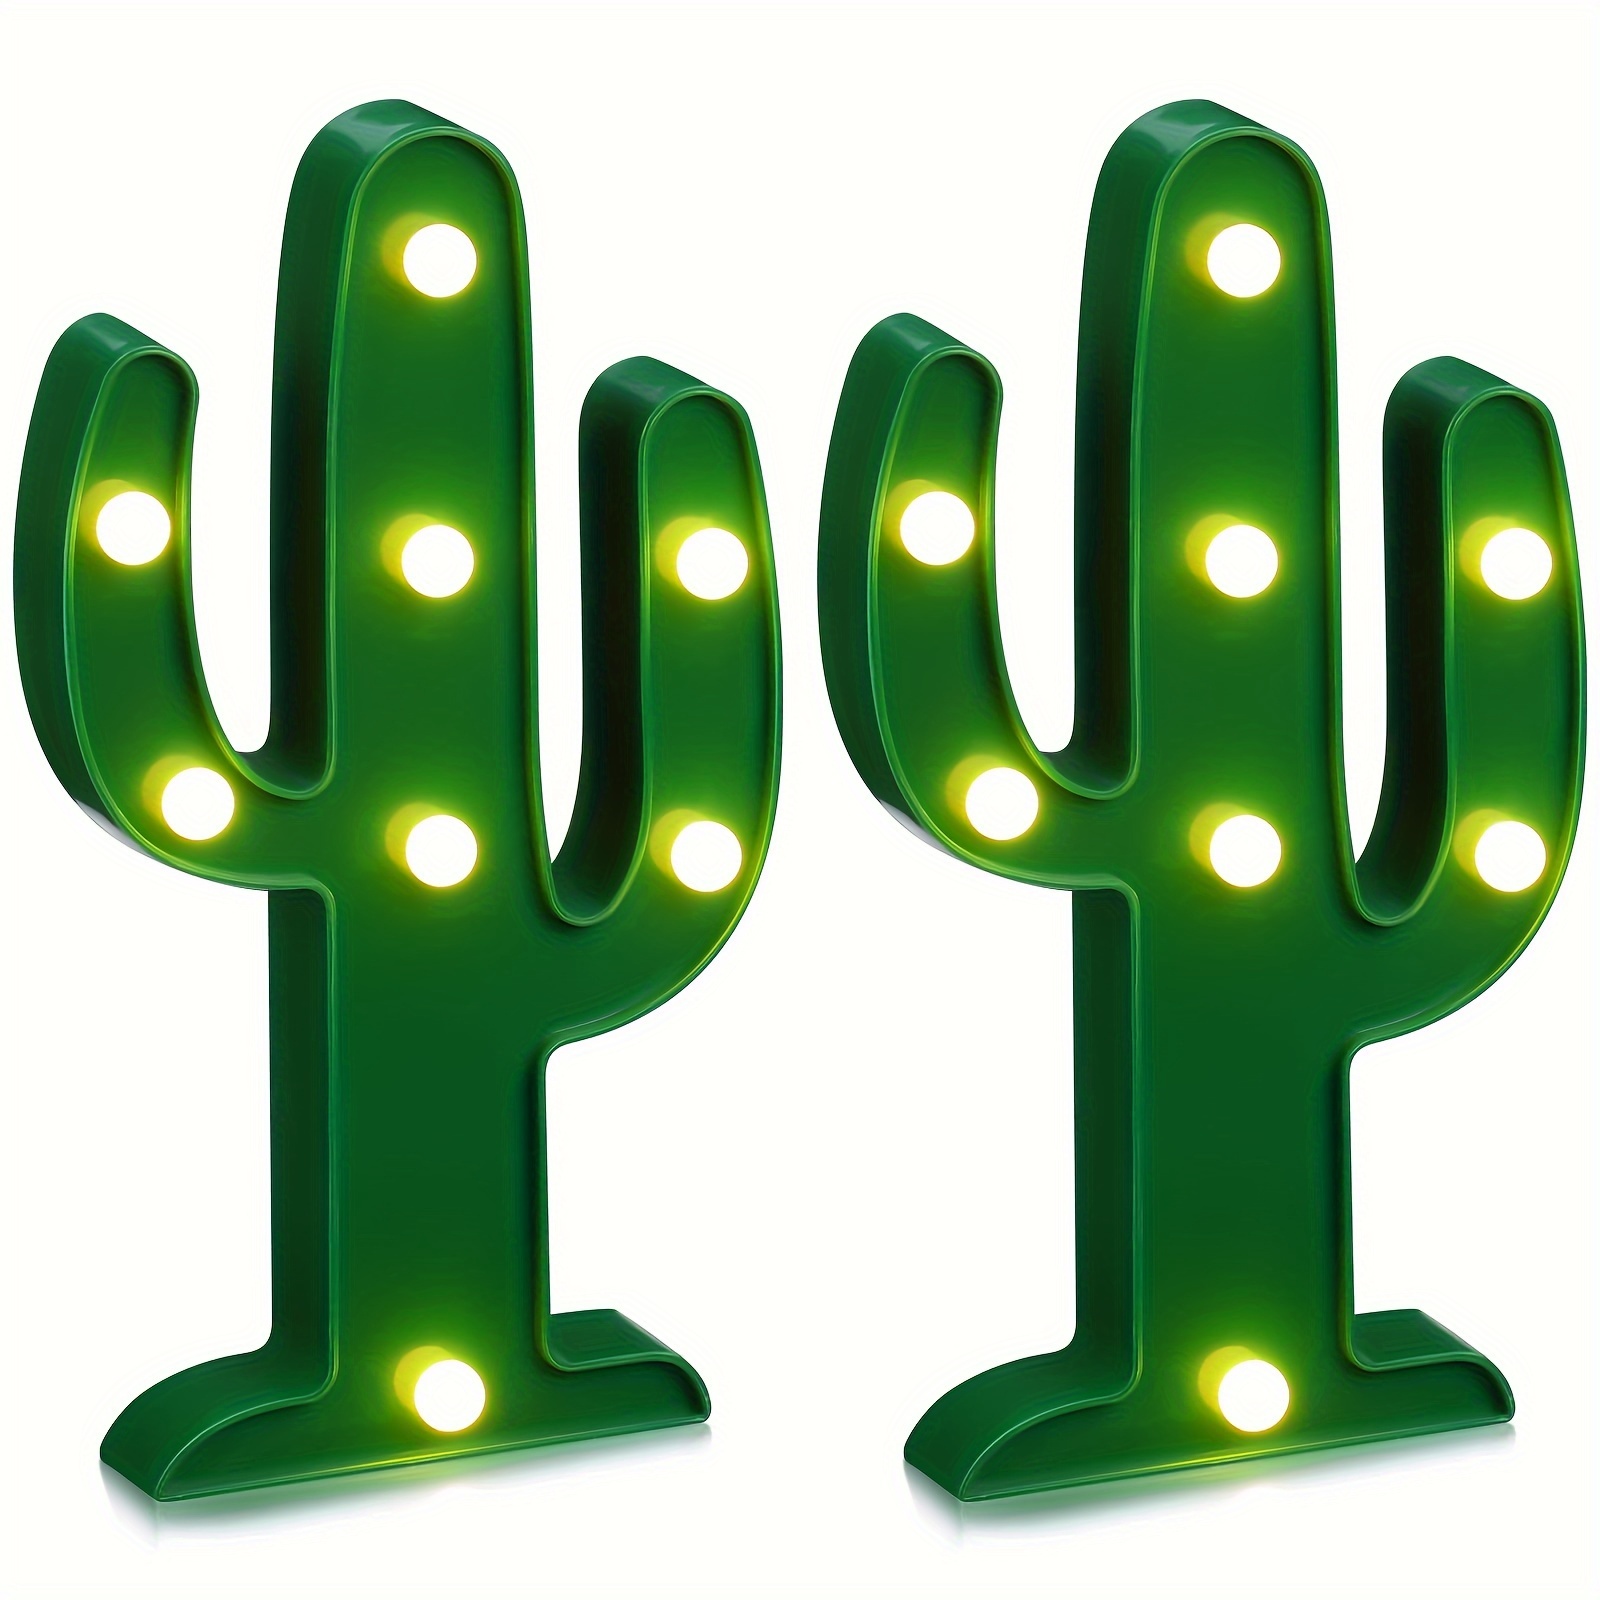 

2pcs Led Cactus Night Lights, Green Plastic Cactus Decor With , Wall Mountable, Battery Operated For Home & Party, Festive Mexican Table Decoration